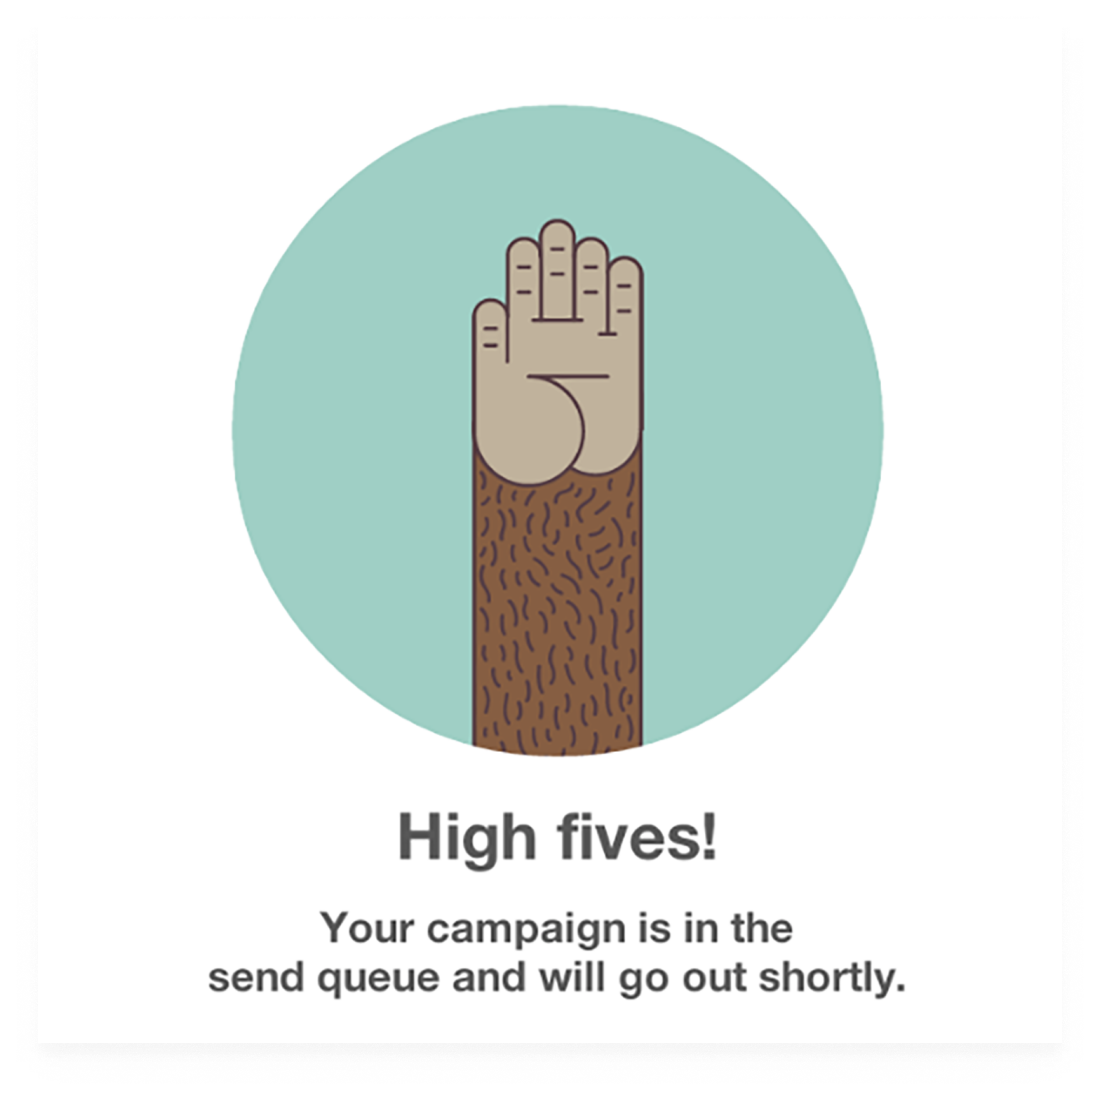 Bekräftelsemeddelande från Mailchimp med texten "High fives! Your campaign is in the send queue and will go out shortly".